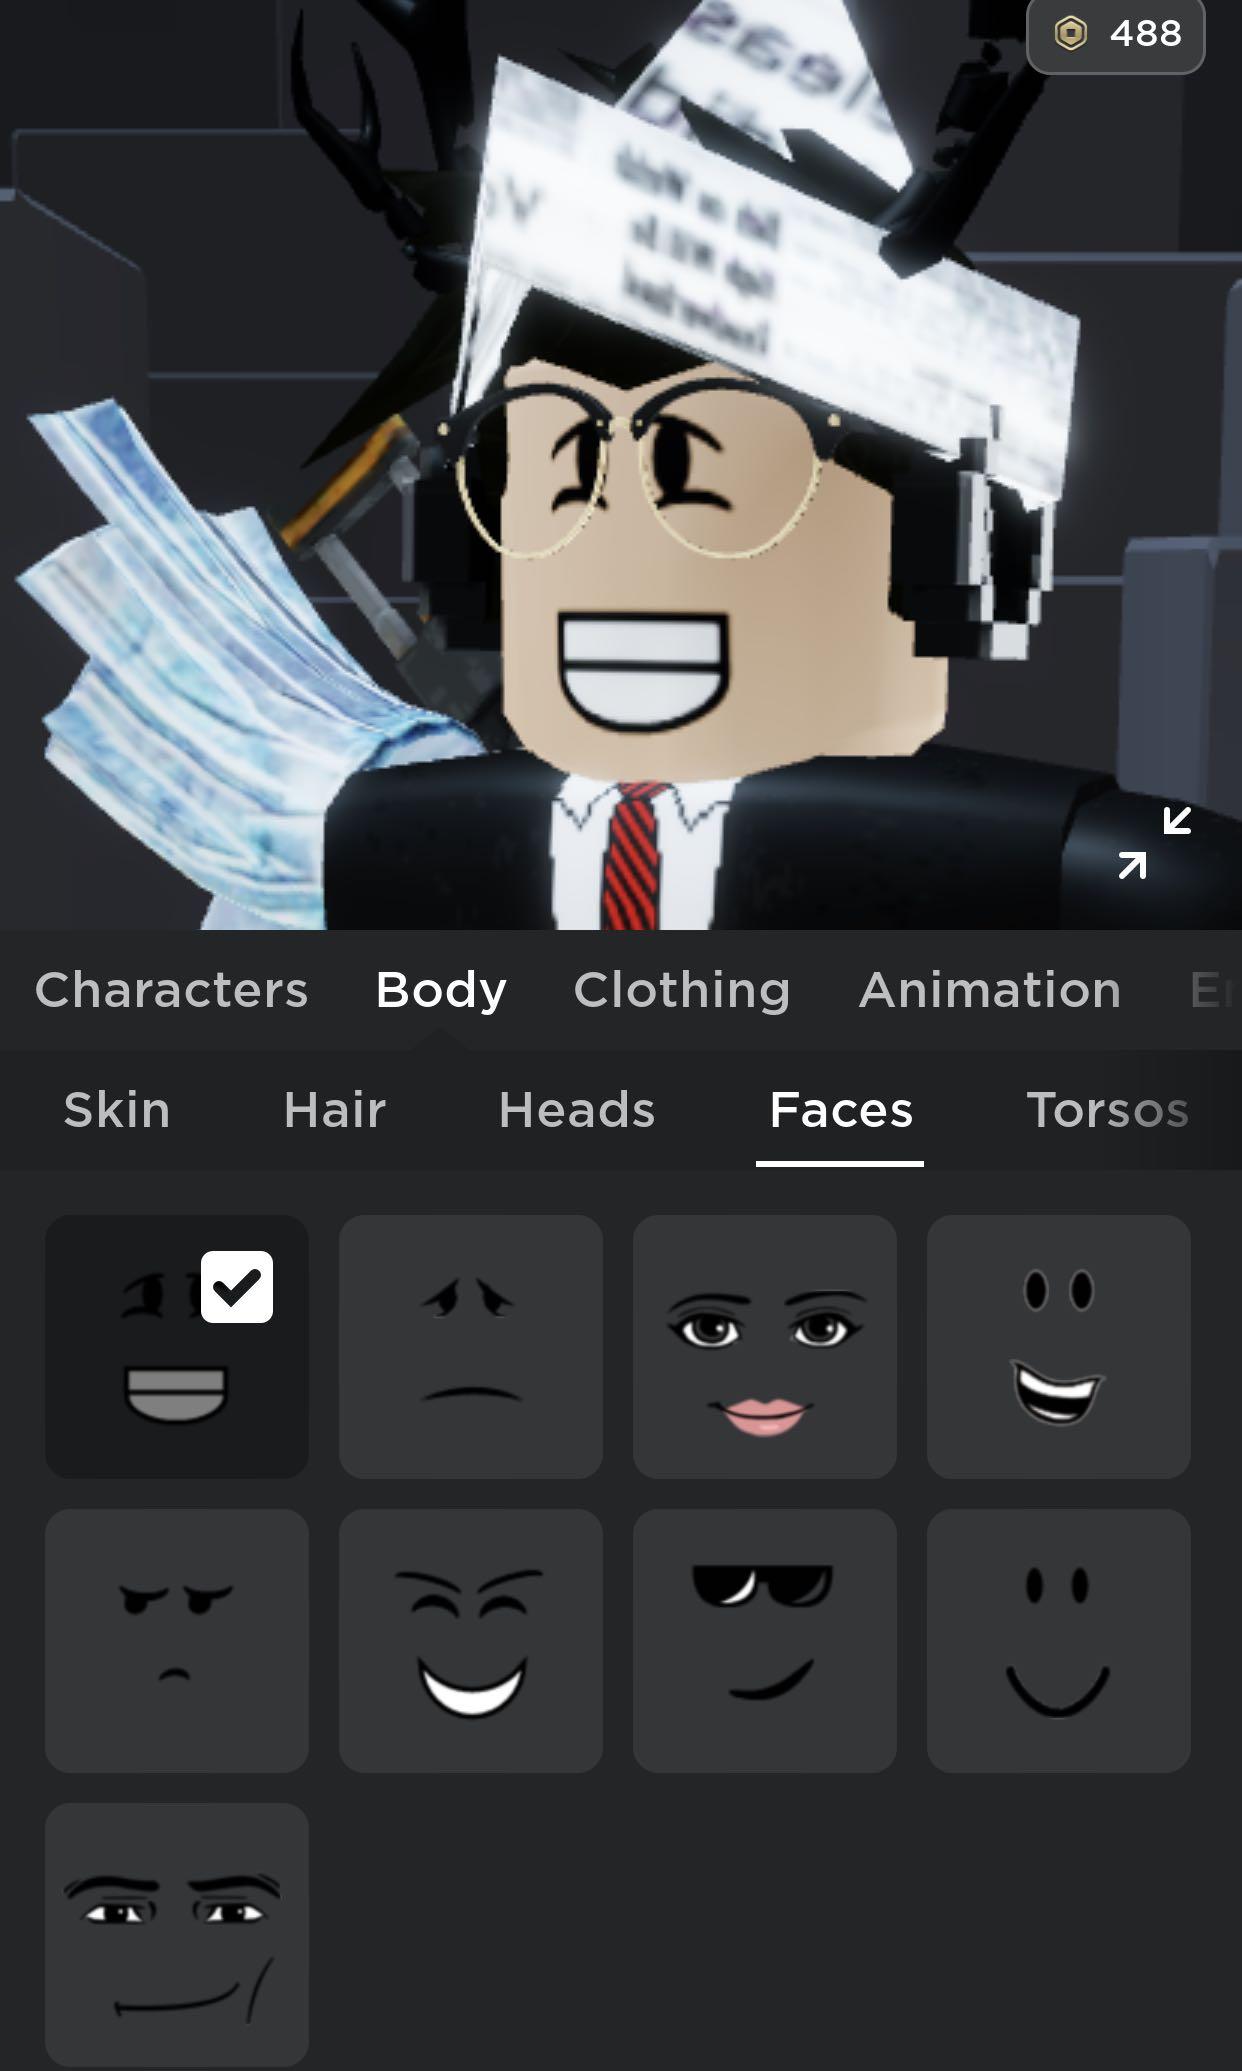 Cheap Roblox Account For Sale Toys Games Video Gaming In Game Products On Carousell - details about roblox account cheap